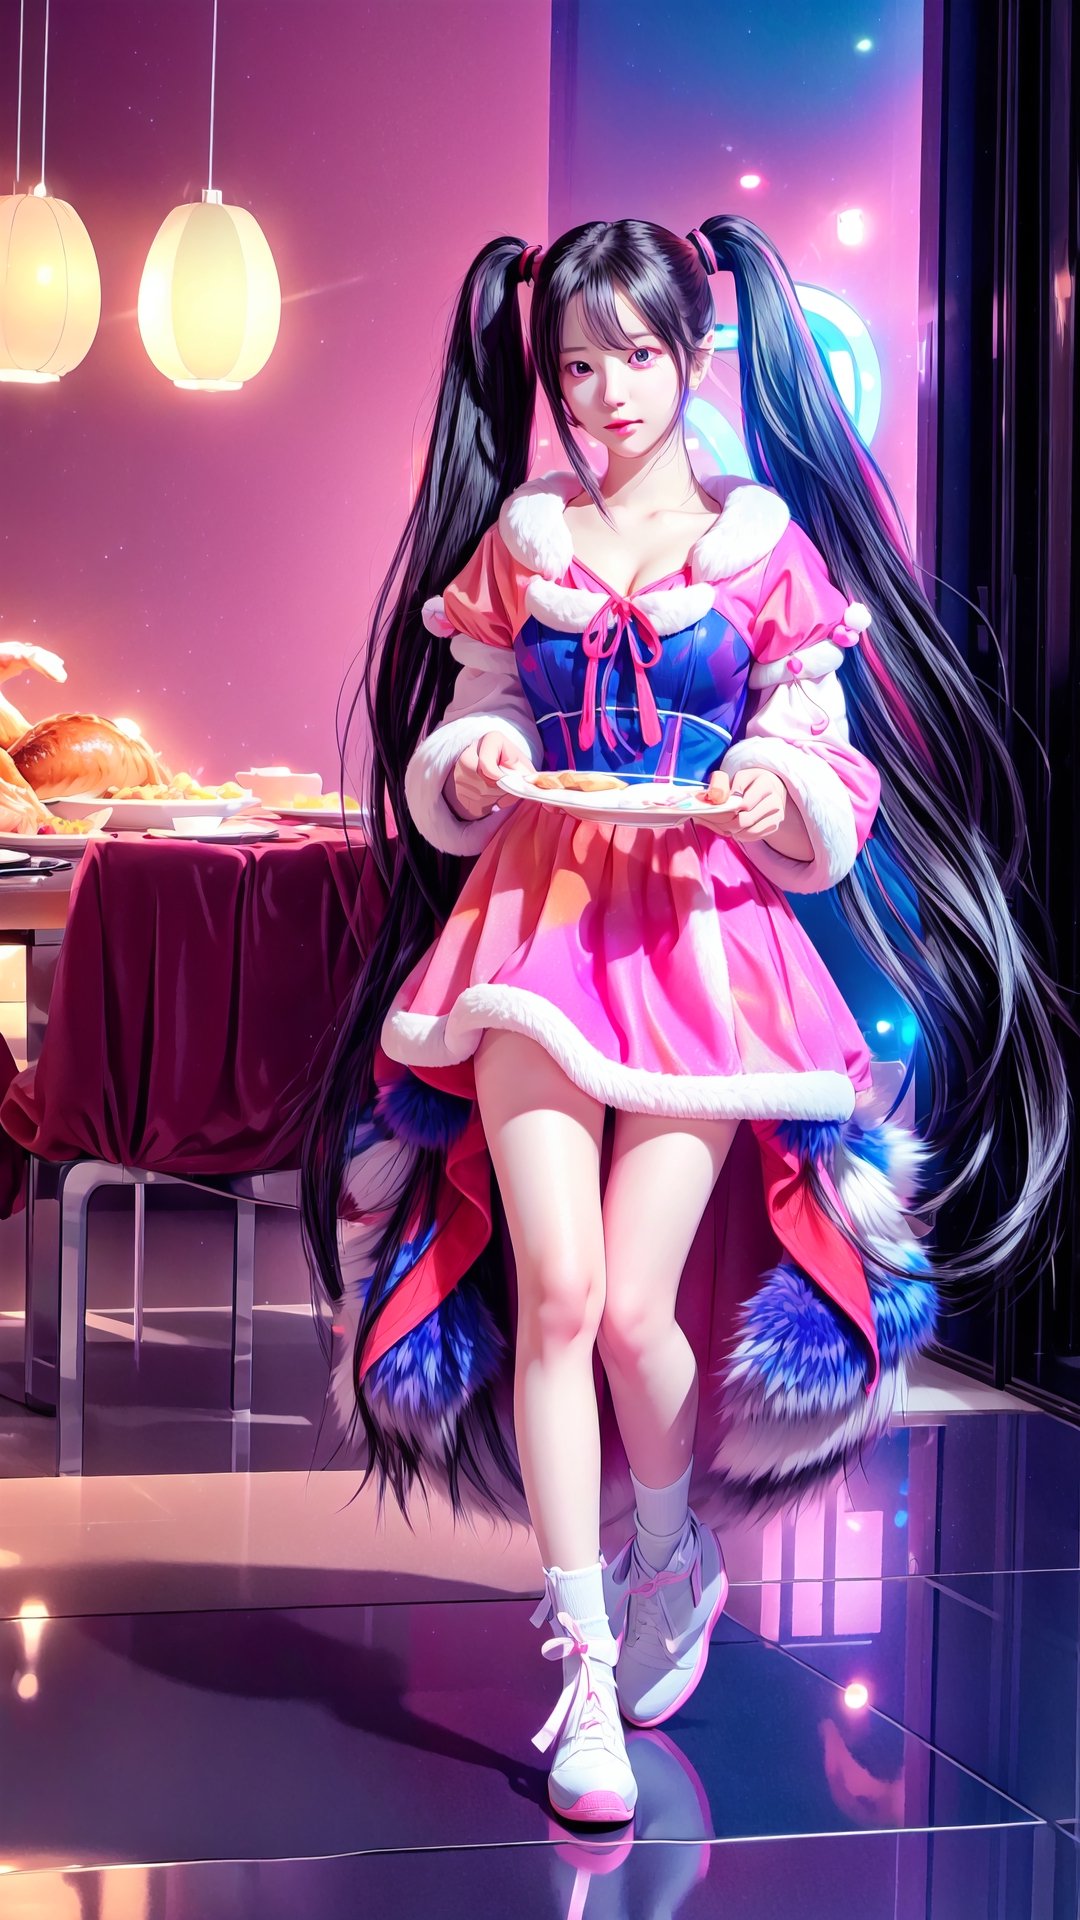 full body, ultra-detailed anime artwork ,, twintails, big eyes, cute full lips, lip gloss, fine dark skin, vibrant colors, elegant, carrying a plate of thanksgiving turkey, dramatic, dining room with neon light, sheer dress with fur ,High detailed ,raidenshogundef,monadef,Color magic,1 girl,Saturated colors,Color saturation ,m_kayoung,bibilorashy,nana,goyoonjung,iu,hyojoo,sohee